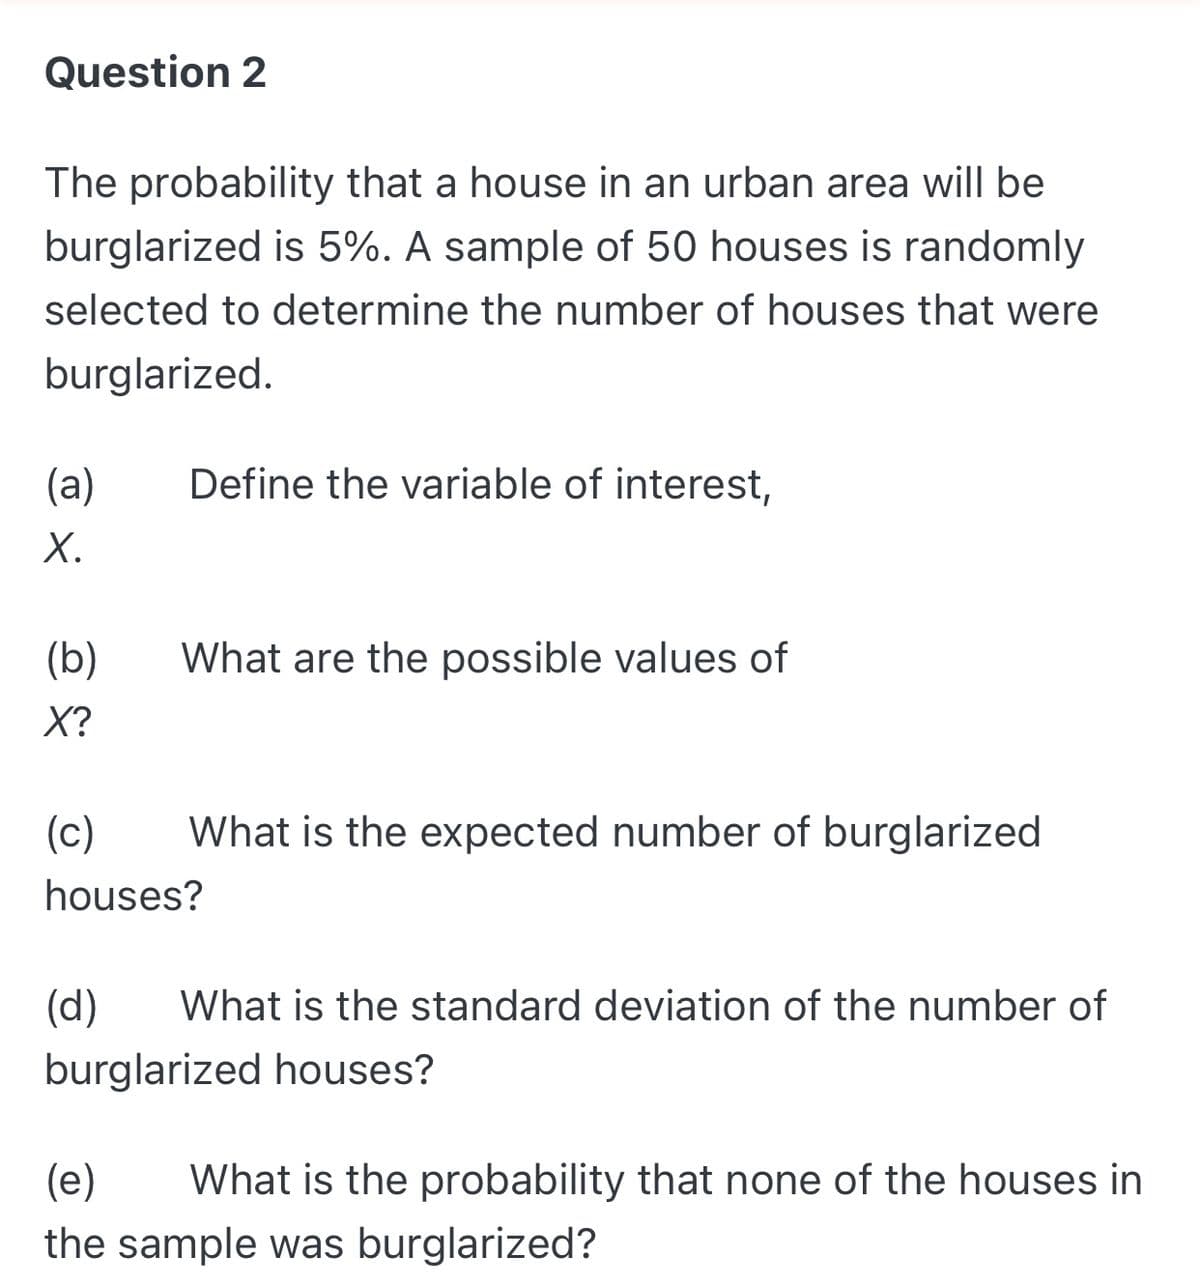 Question 2
The probability that a house in an urban area will be
burglarized is 5%. A sample of 50 houses is randomly
selected to determine the number of houses that were
burglarized.
(a)
Define the variable of interest,
Х.
(b)
What are the possible values of
X?
(c)
What is the expected number of burglarized
houses?
(d)
What is the standard deviation of the number of
burglarized houses?
(e)
What is the probability that none of the houses in
the sample was burglarized?
